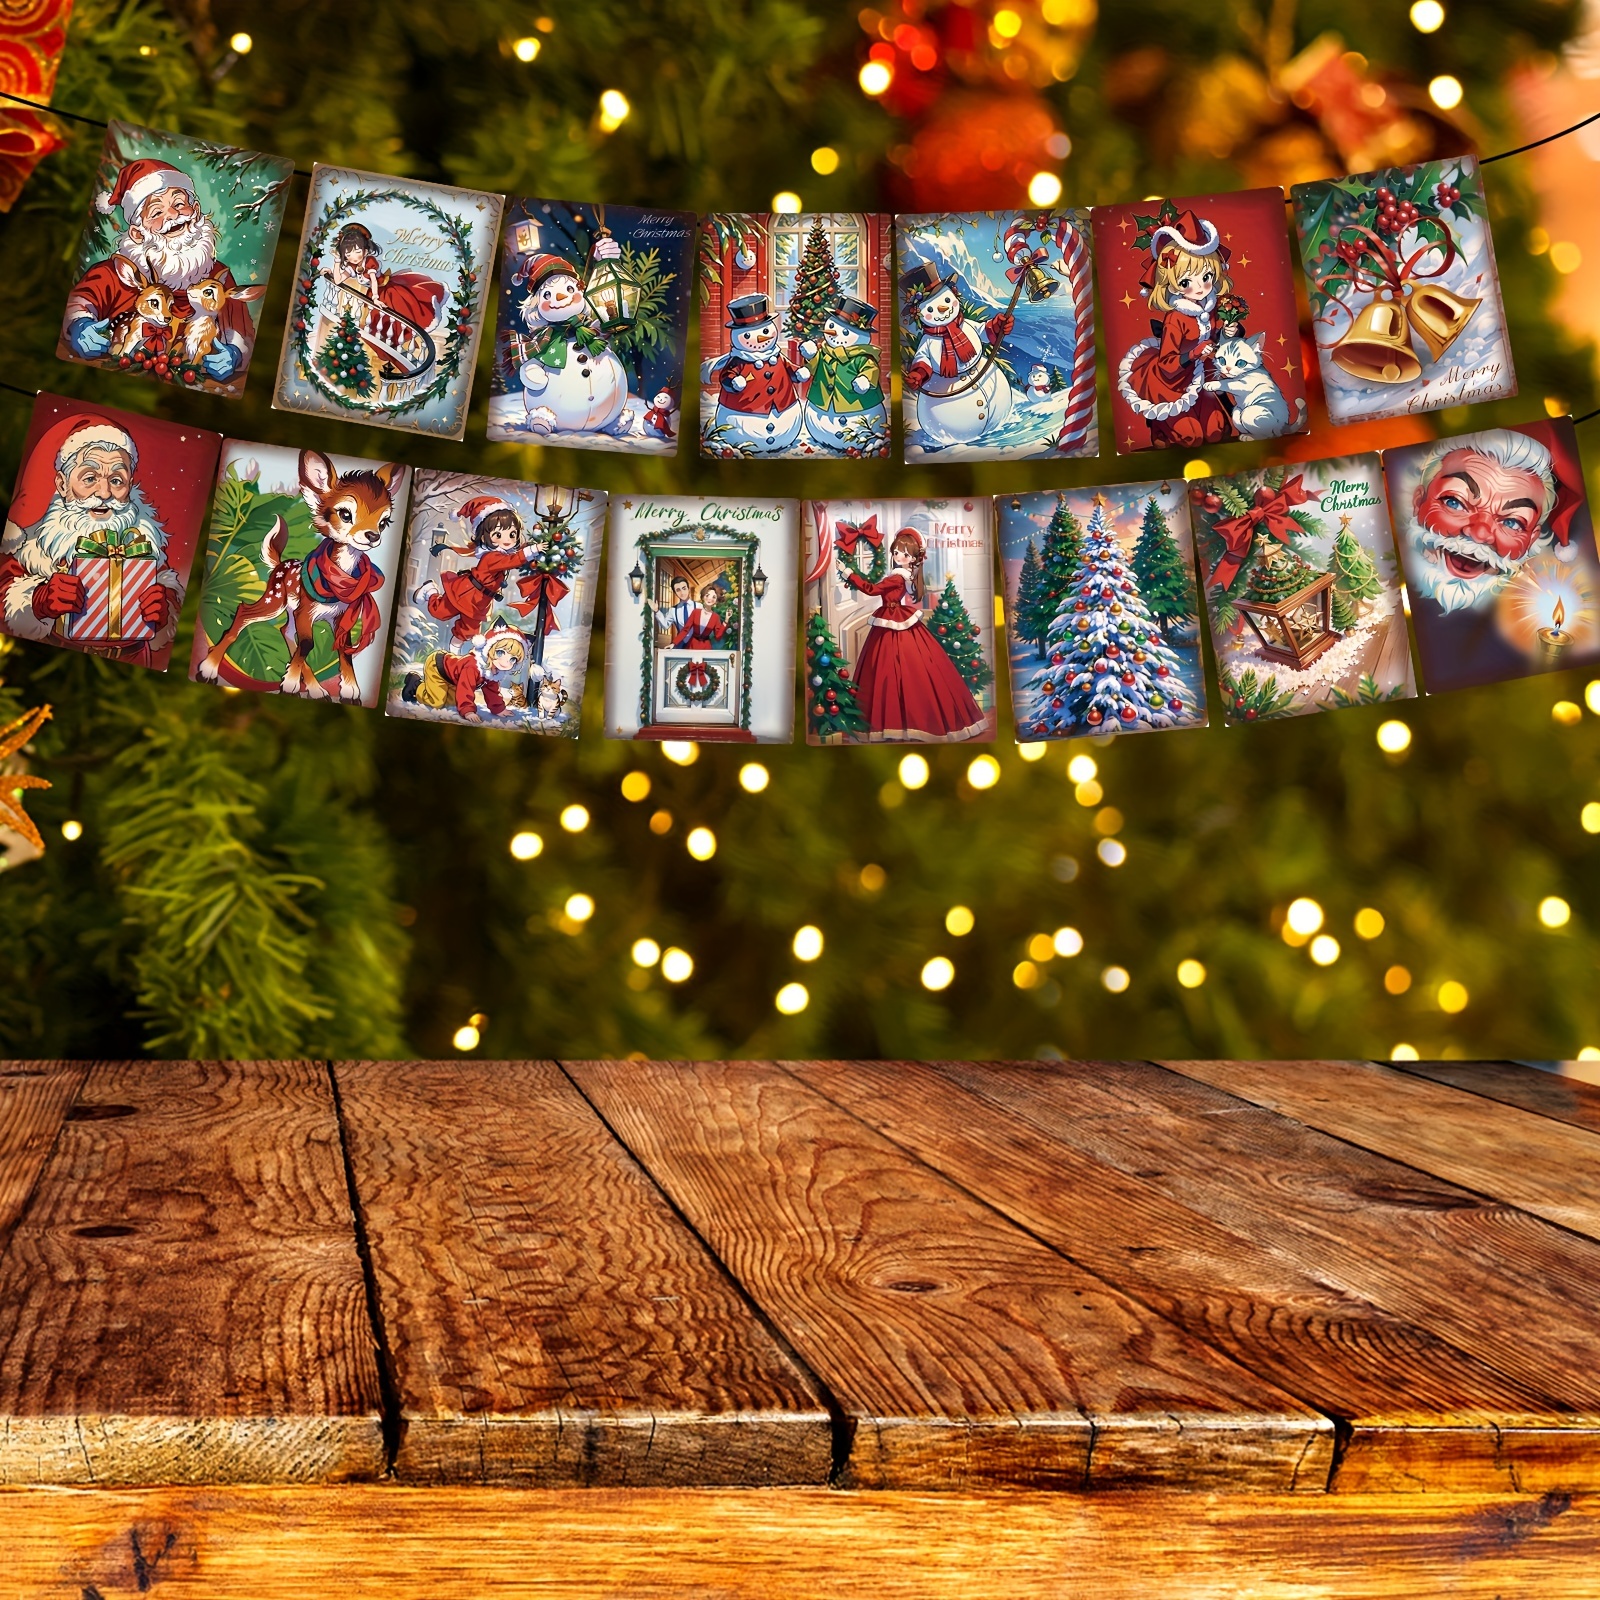  Christmas Decorations Vintage Style Christmas  Banner,Traditional Vintage Victorian Style Christmas Bunting, Vintage Style  Santa Christmas Decorations Indoor for Home Office Party Fireplace Mantle :  Home & Kitchen